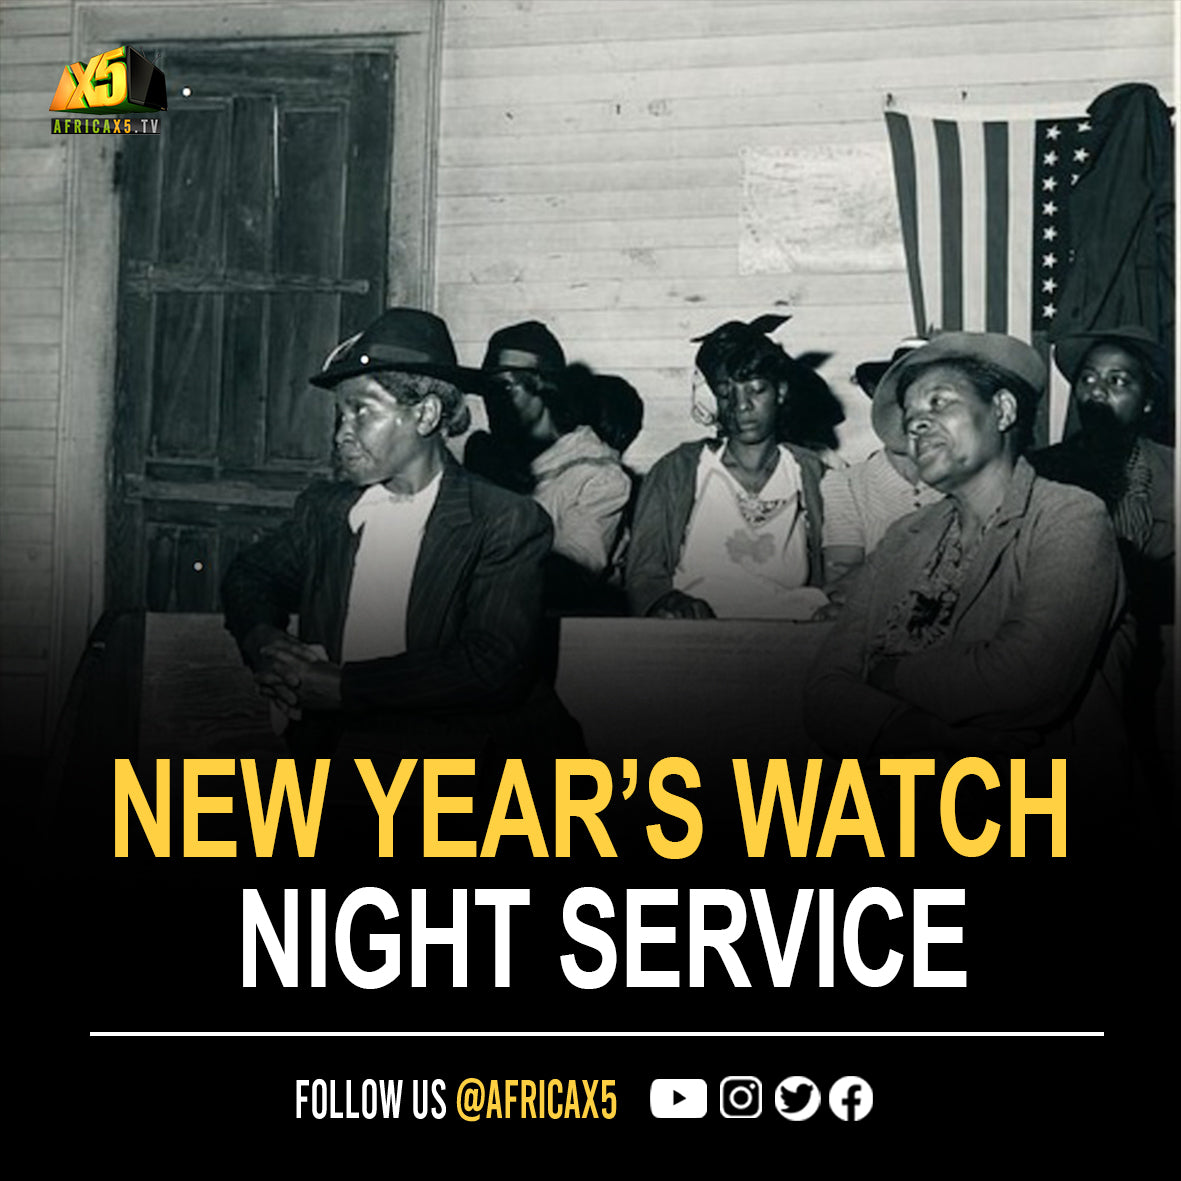 History of the New Year’s Watch Night Service.